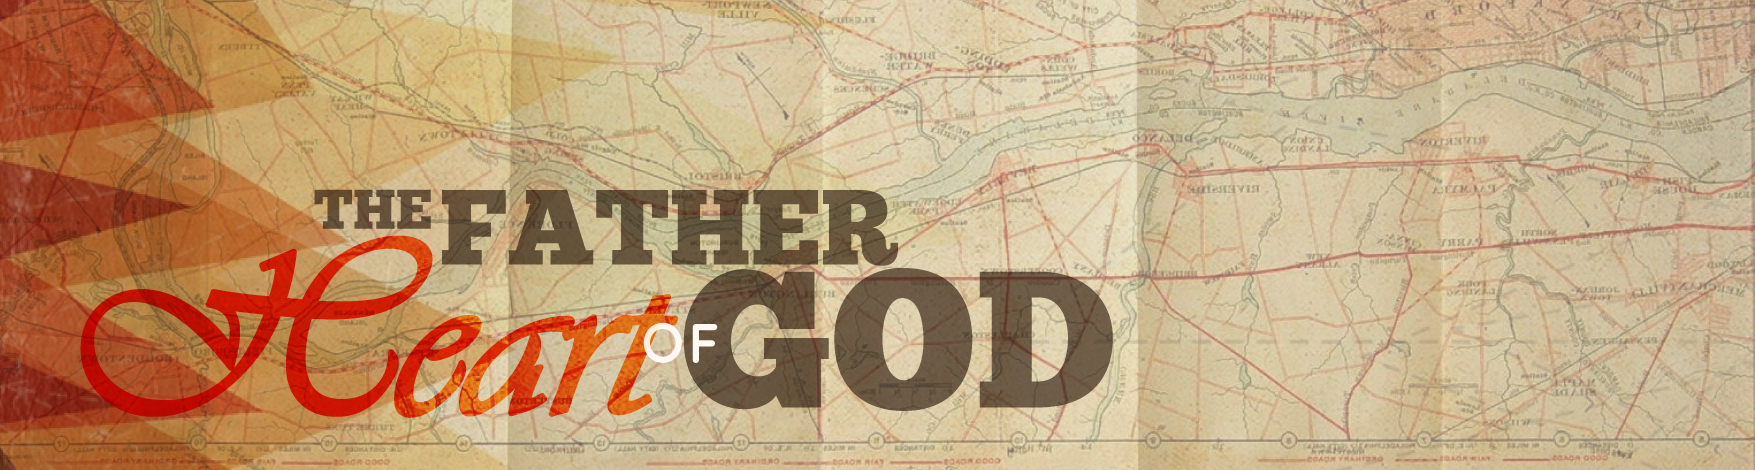 series-father-heart-of-god